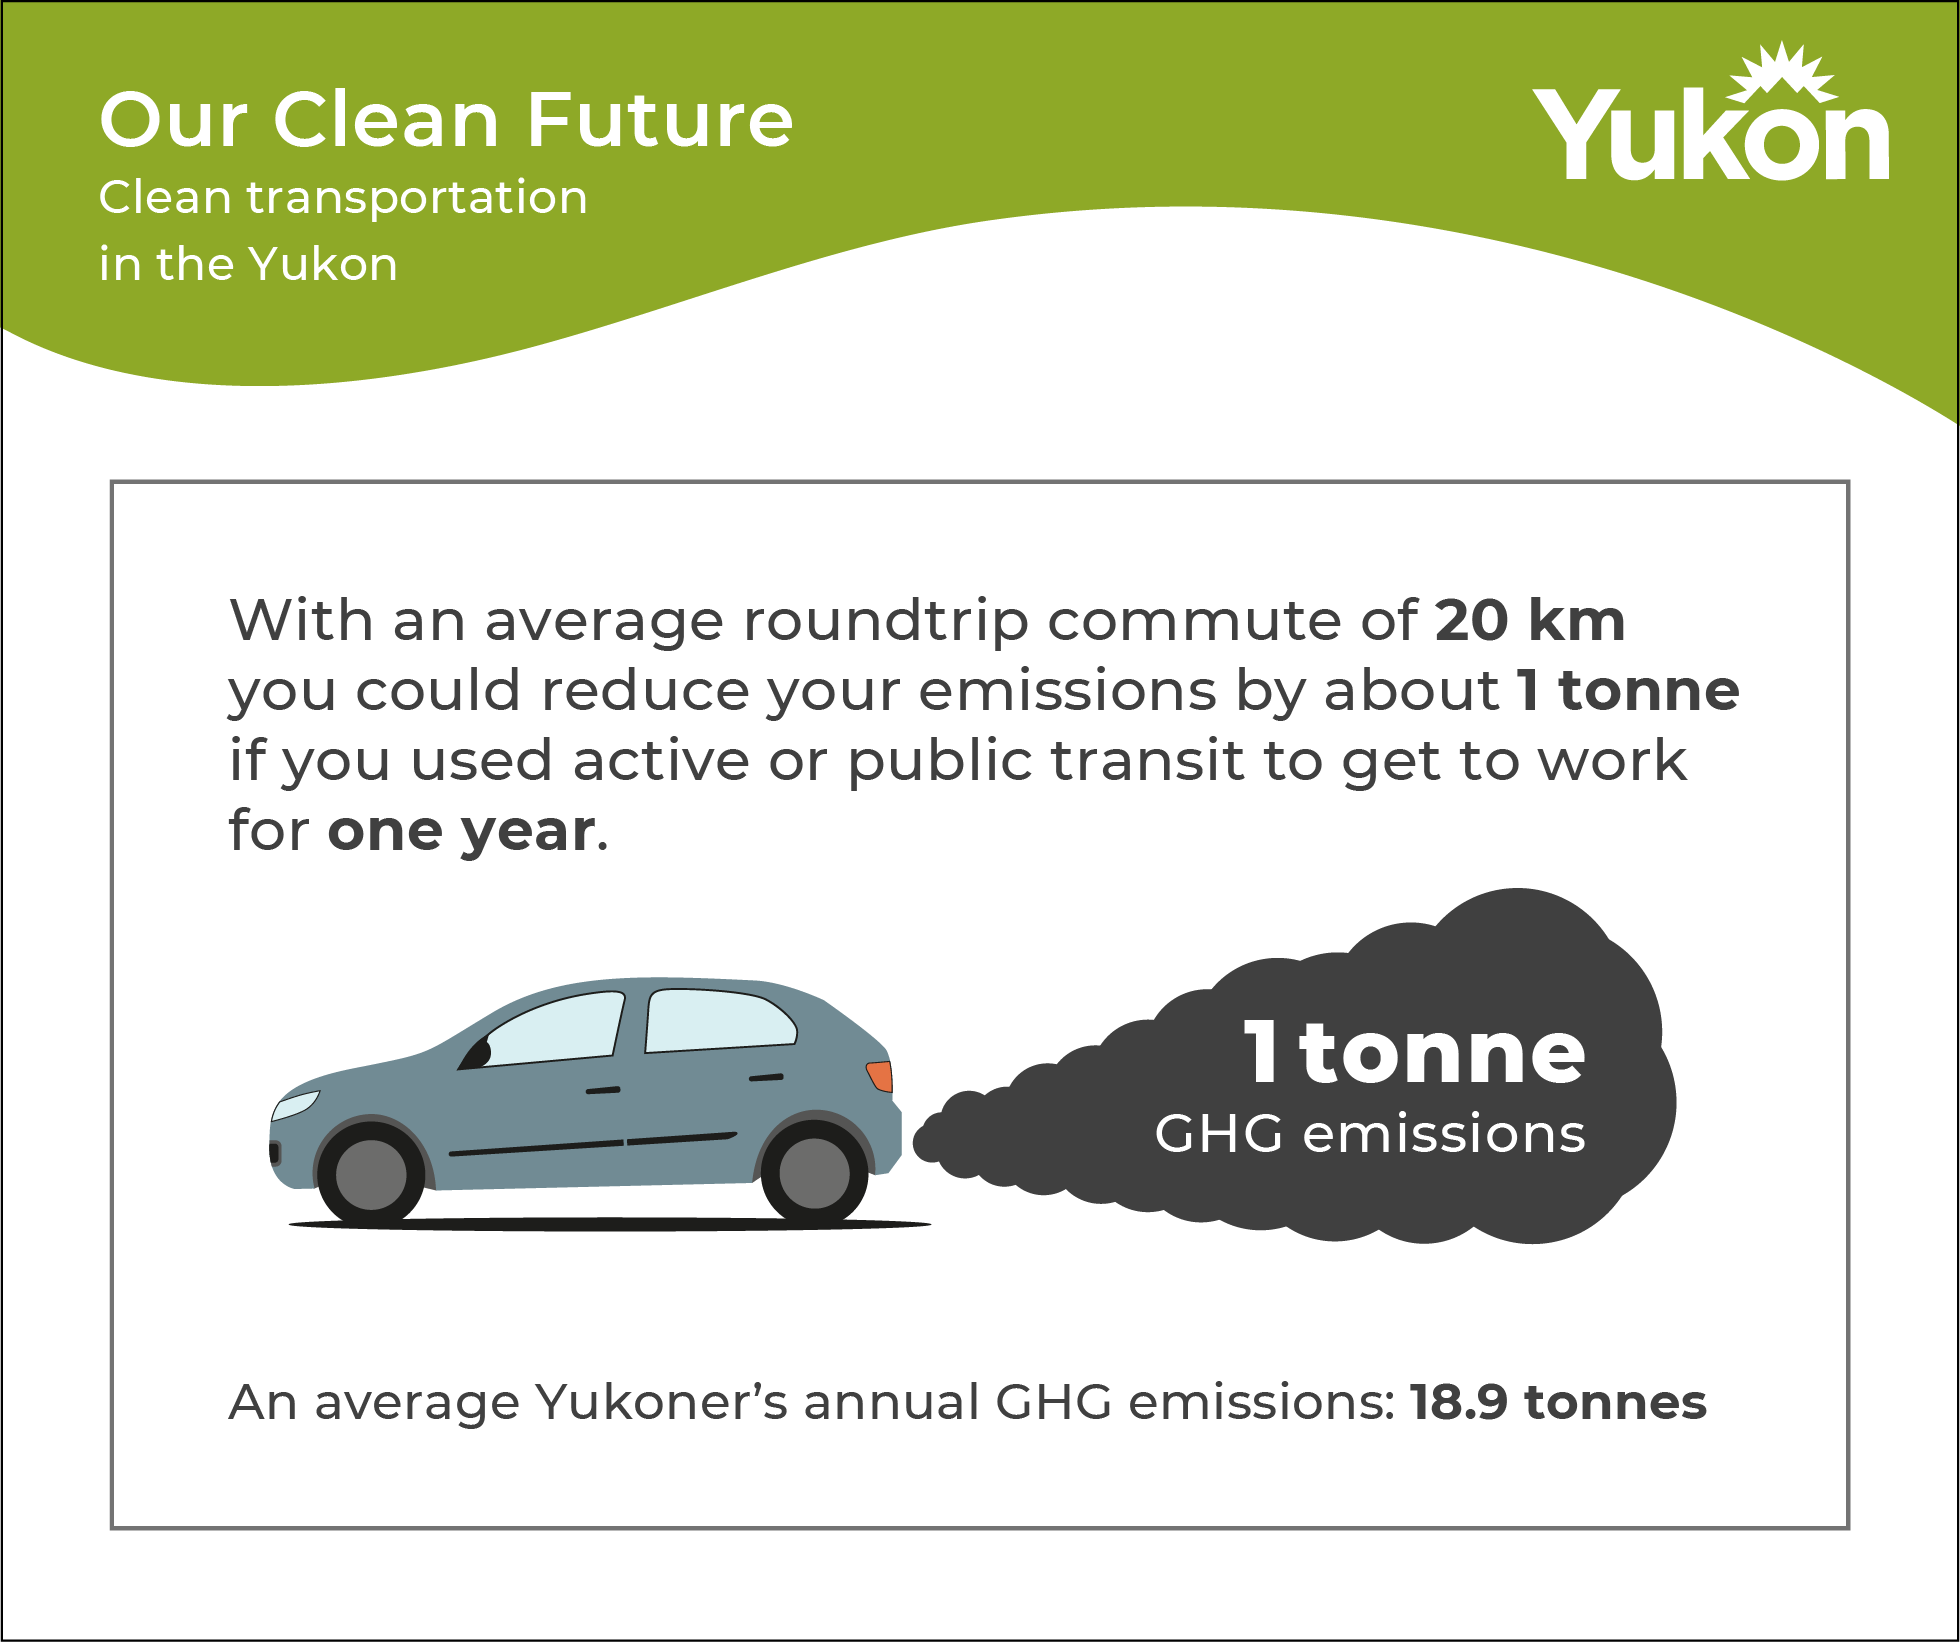 Illustration & text, transportation in Yukon, With an average roundtrip commute of 20km you could reduce your emissions by about 1 tonne if you used active or public transit to get to work for one year, avarage Yukoner's annual GHG emmissions: 18.9 tonnes